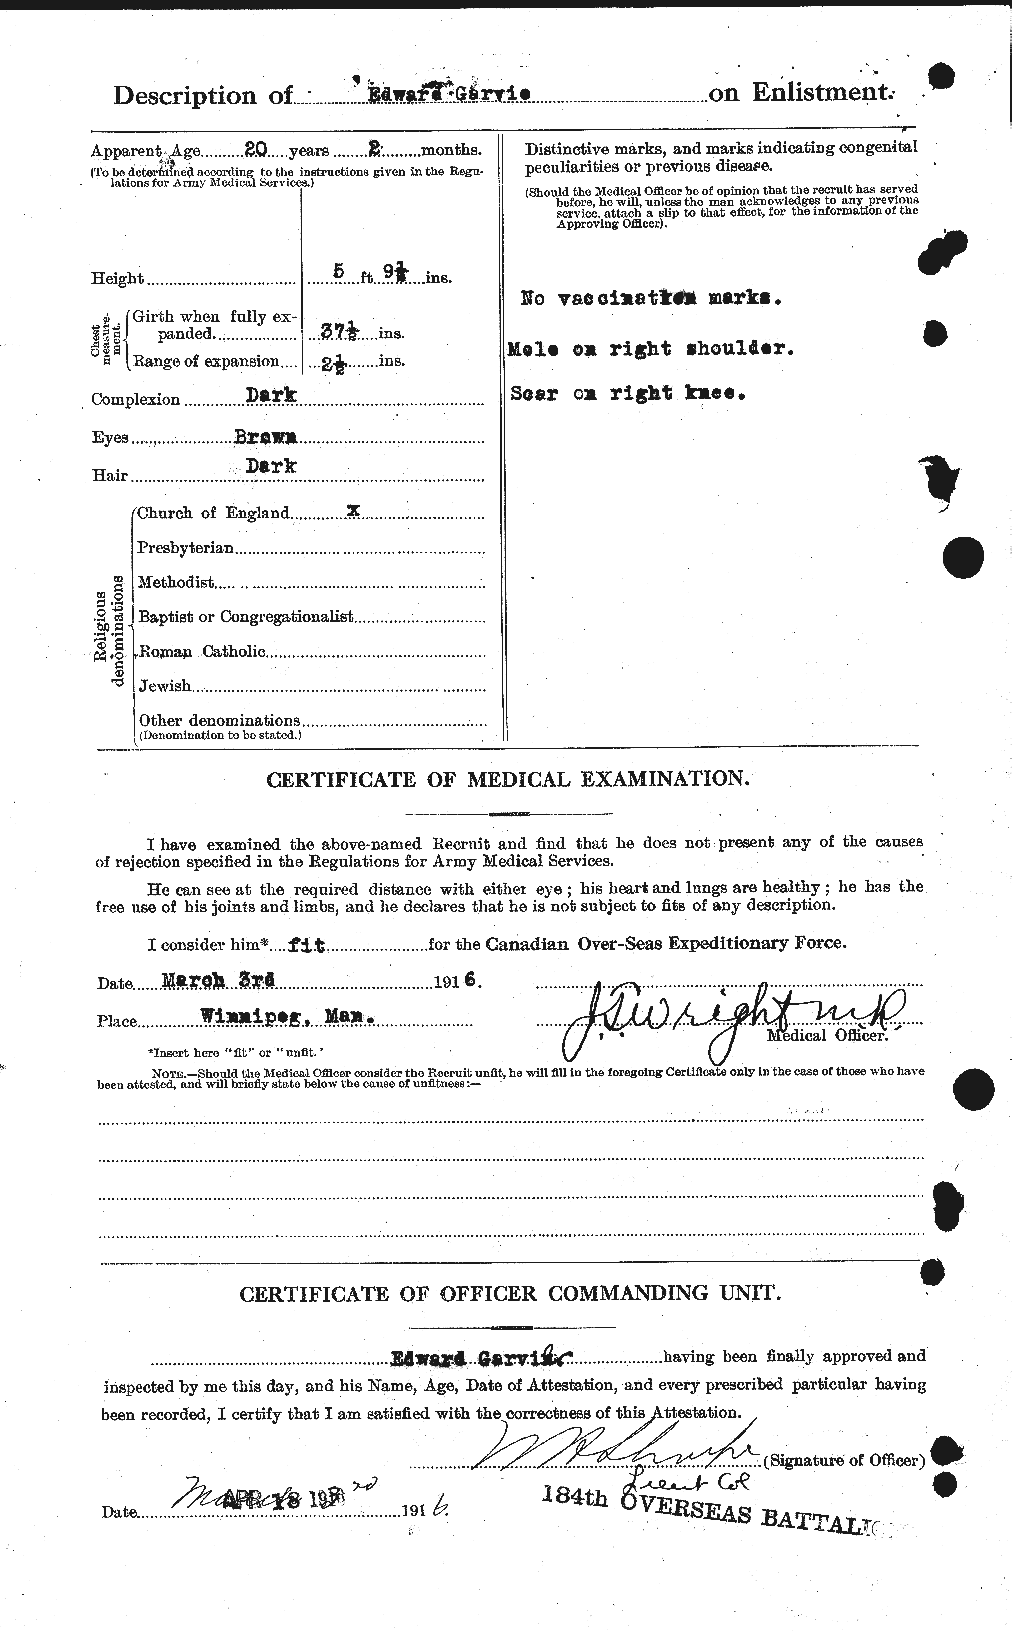 Personnel Records of the First World War - CEF 343638b